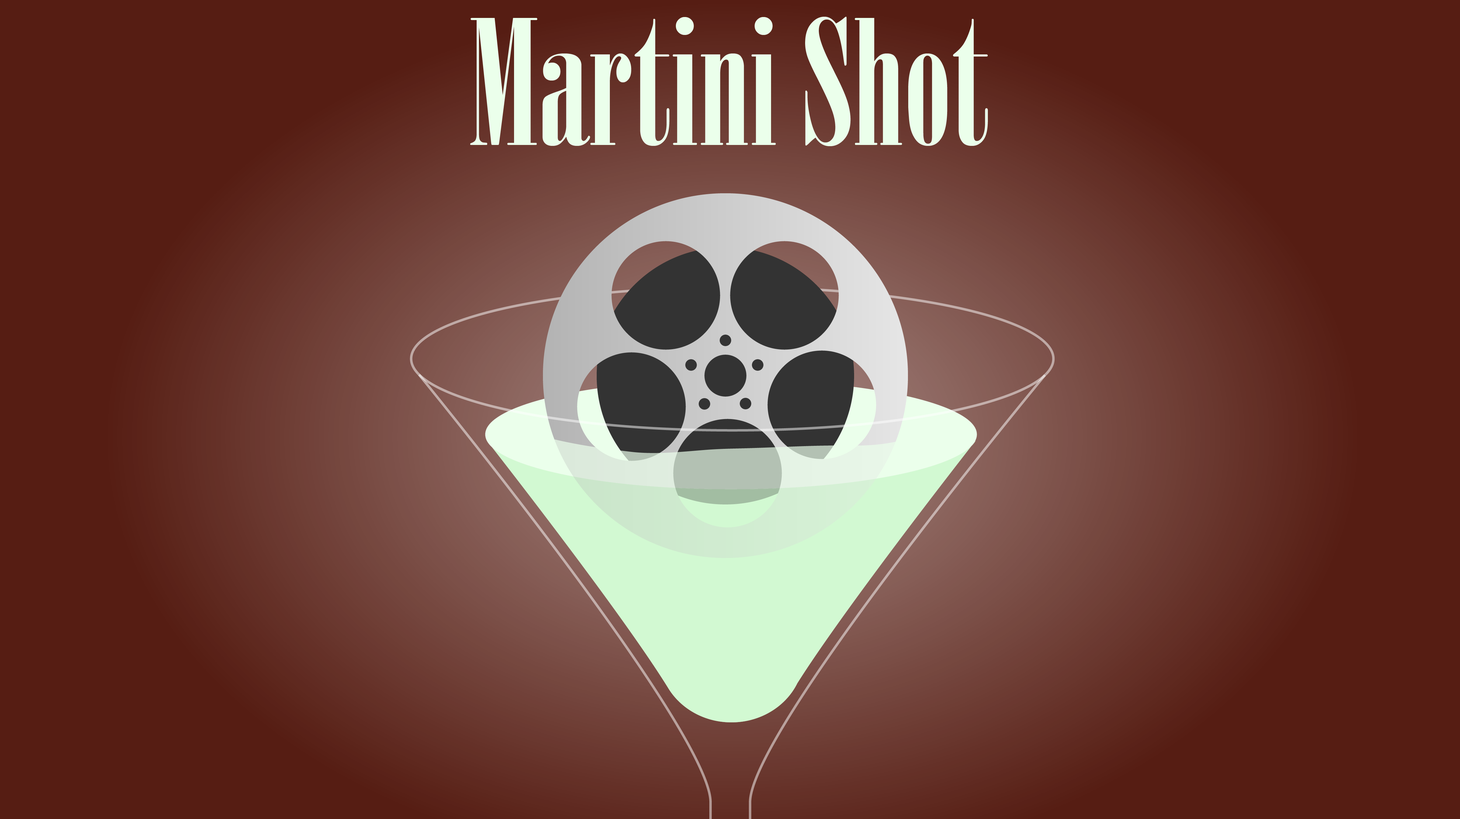 This is Rob Long and on today’s Martini Shot I talk about the best way to stay enthusiastic and creative and energized in the entertainment business, and that’s to have your show cancelled and need to come up with something new.